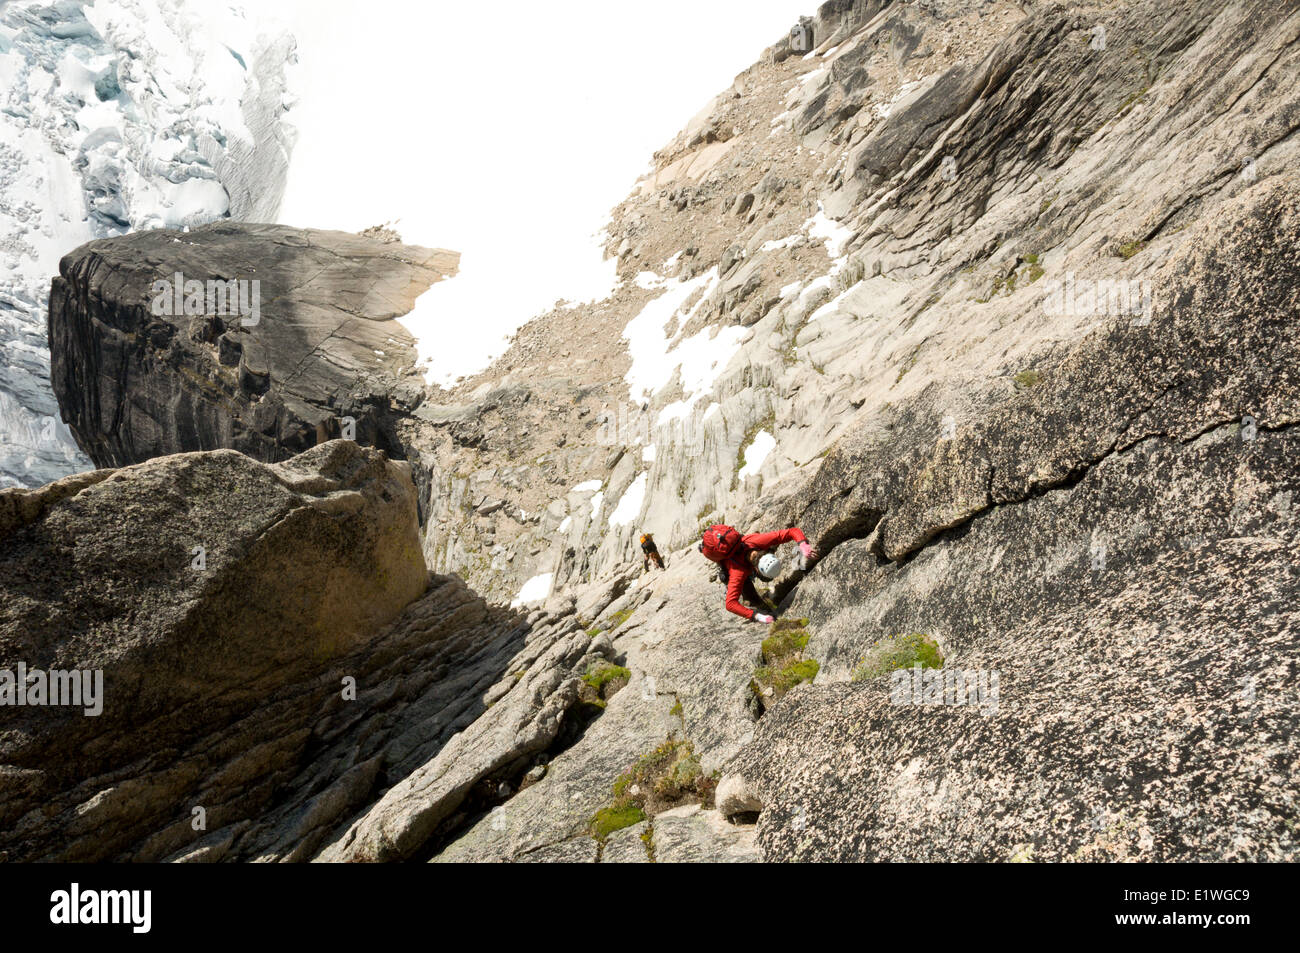 Two climbers ascent Surf's Up, a rock-climbing route on Snowpatch Spire, Bugaboos, British Columbia Stock Photo